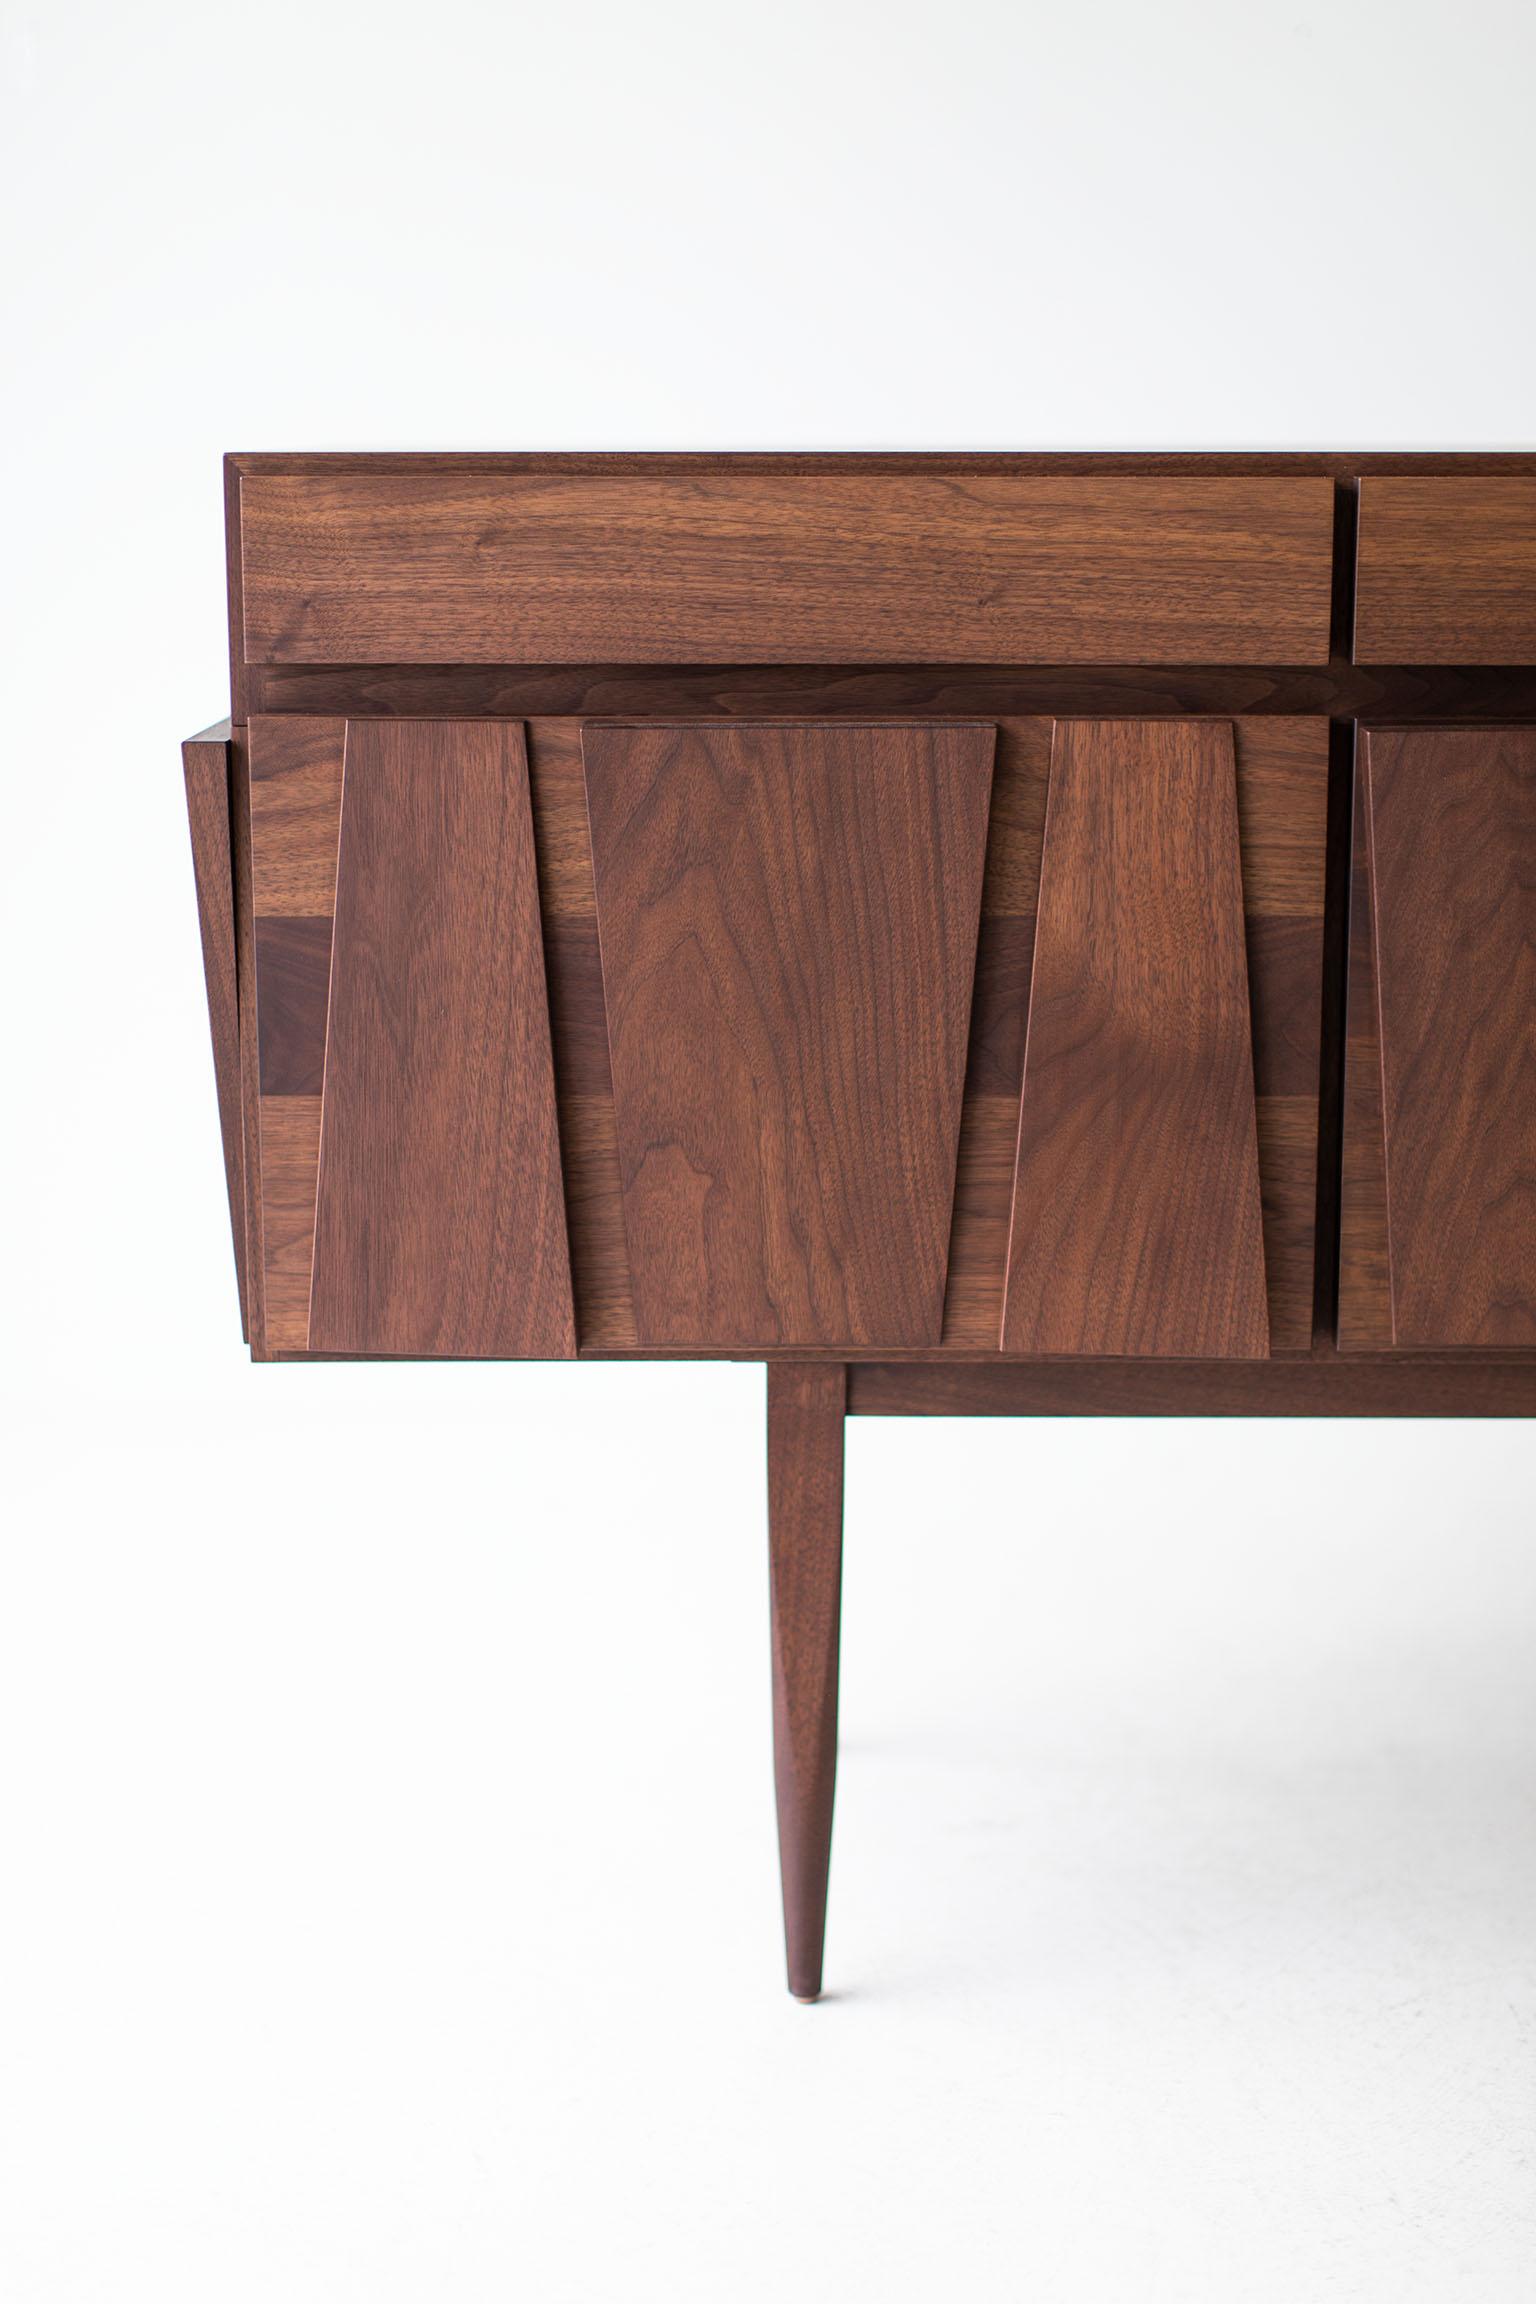 Modern Credenza - 1607 - Craft Associates® Furniture is expertly crafted. The base is constructed by hand from hard wood and not machine. The walnut is then shaped by artisans and finished with a hand applied oil. This piece is also available in